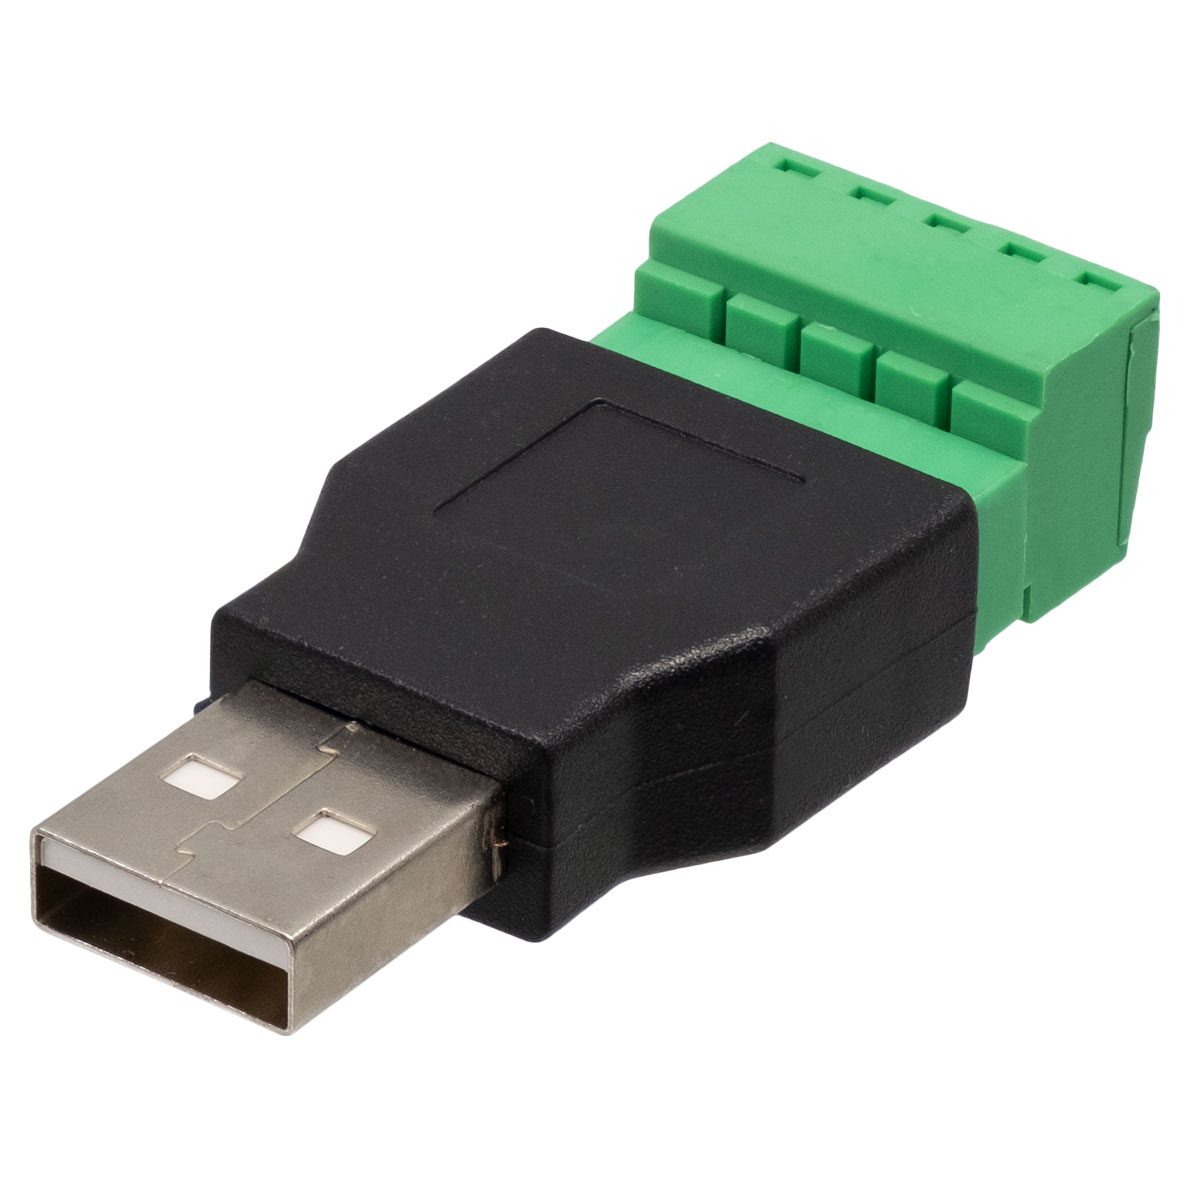 USB AD Male with terminal